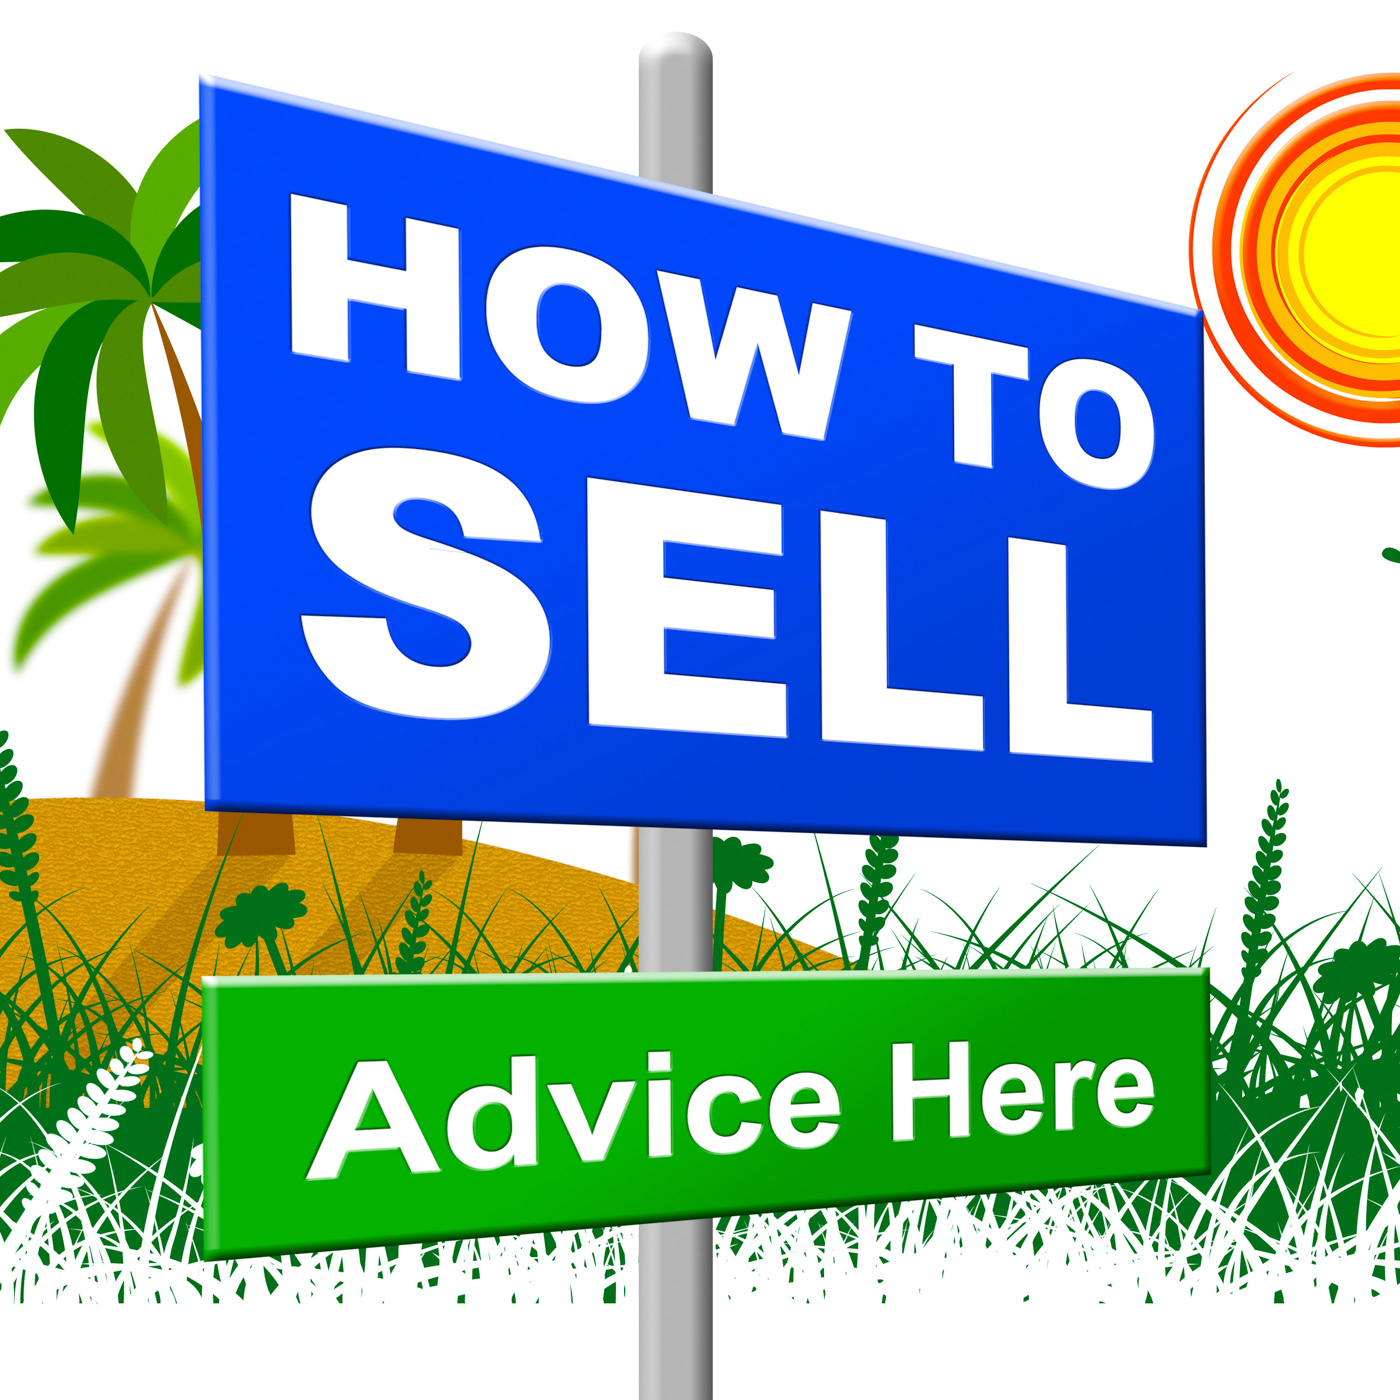 How to sell indicates house for sale and advertisement photo